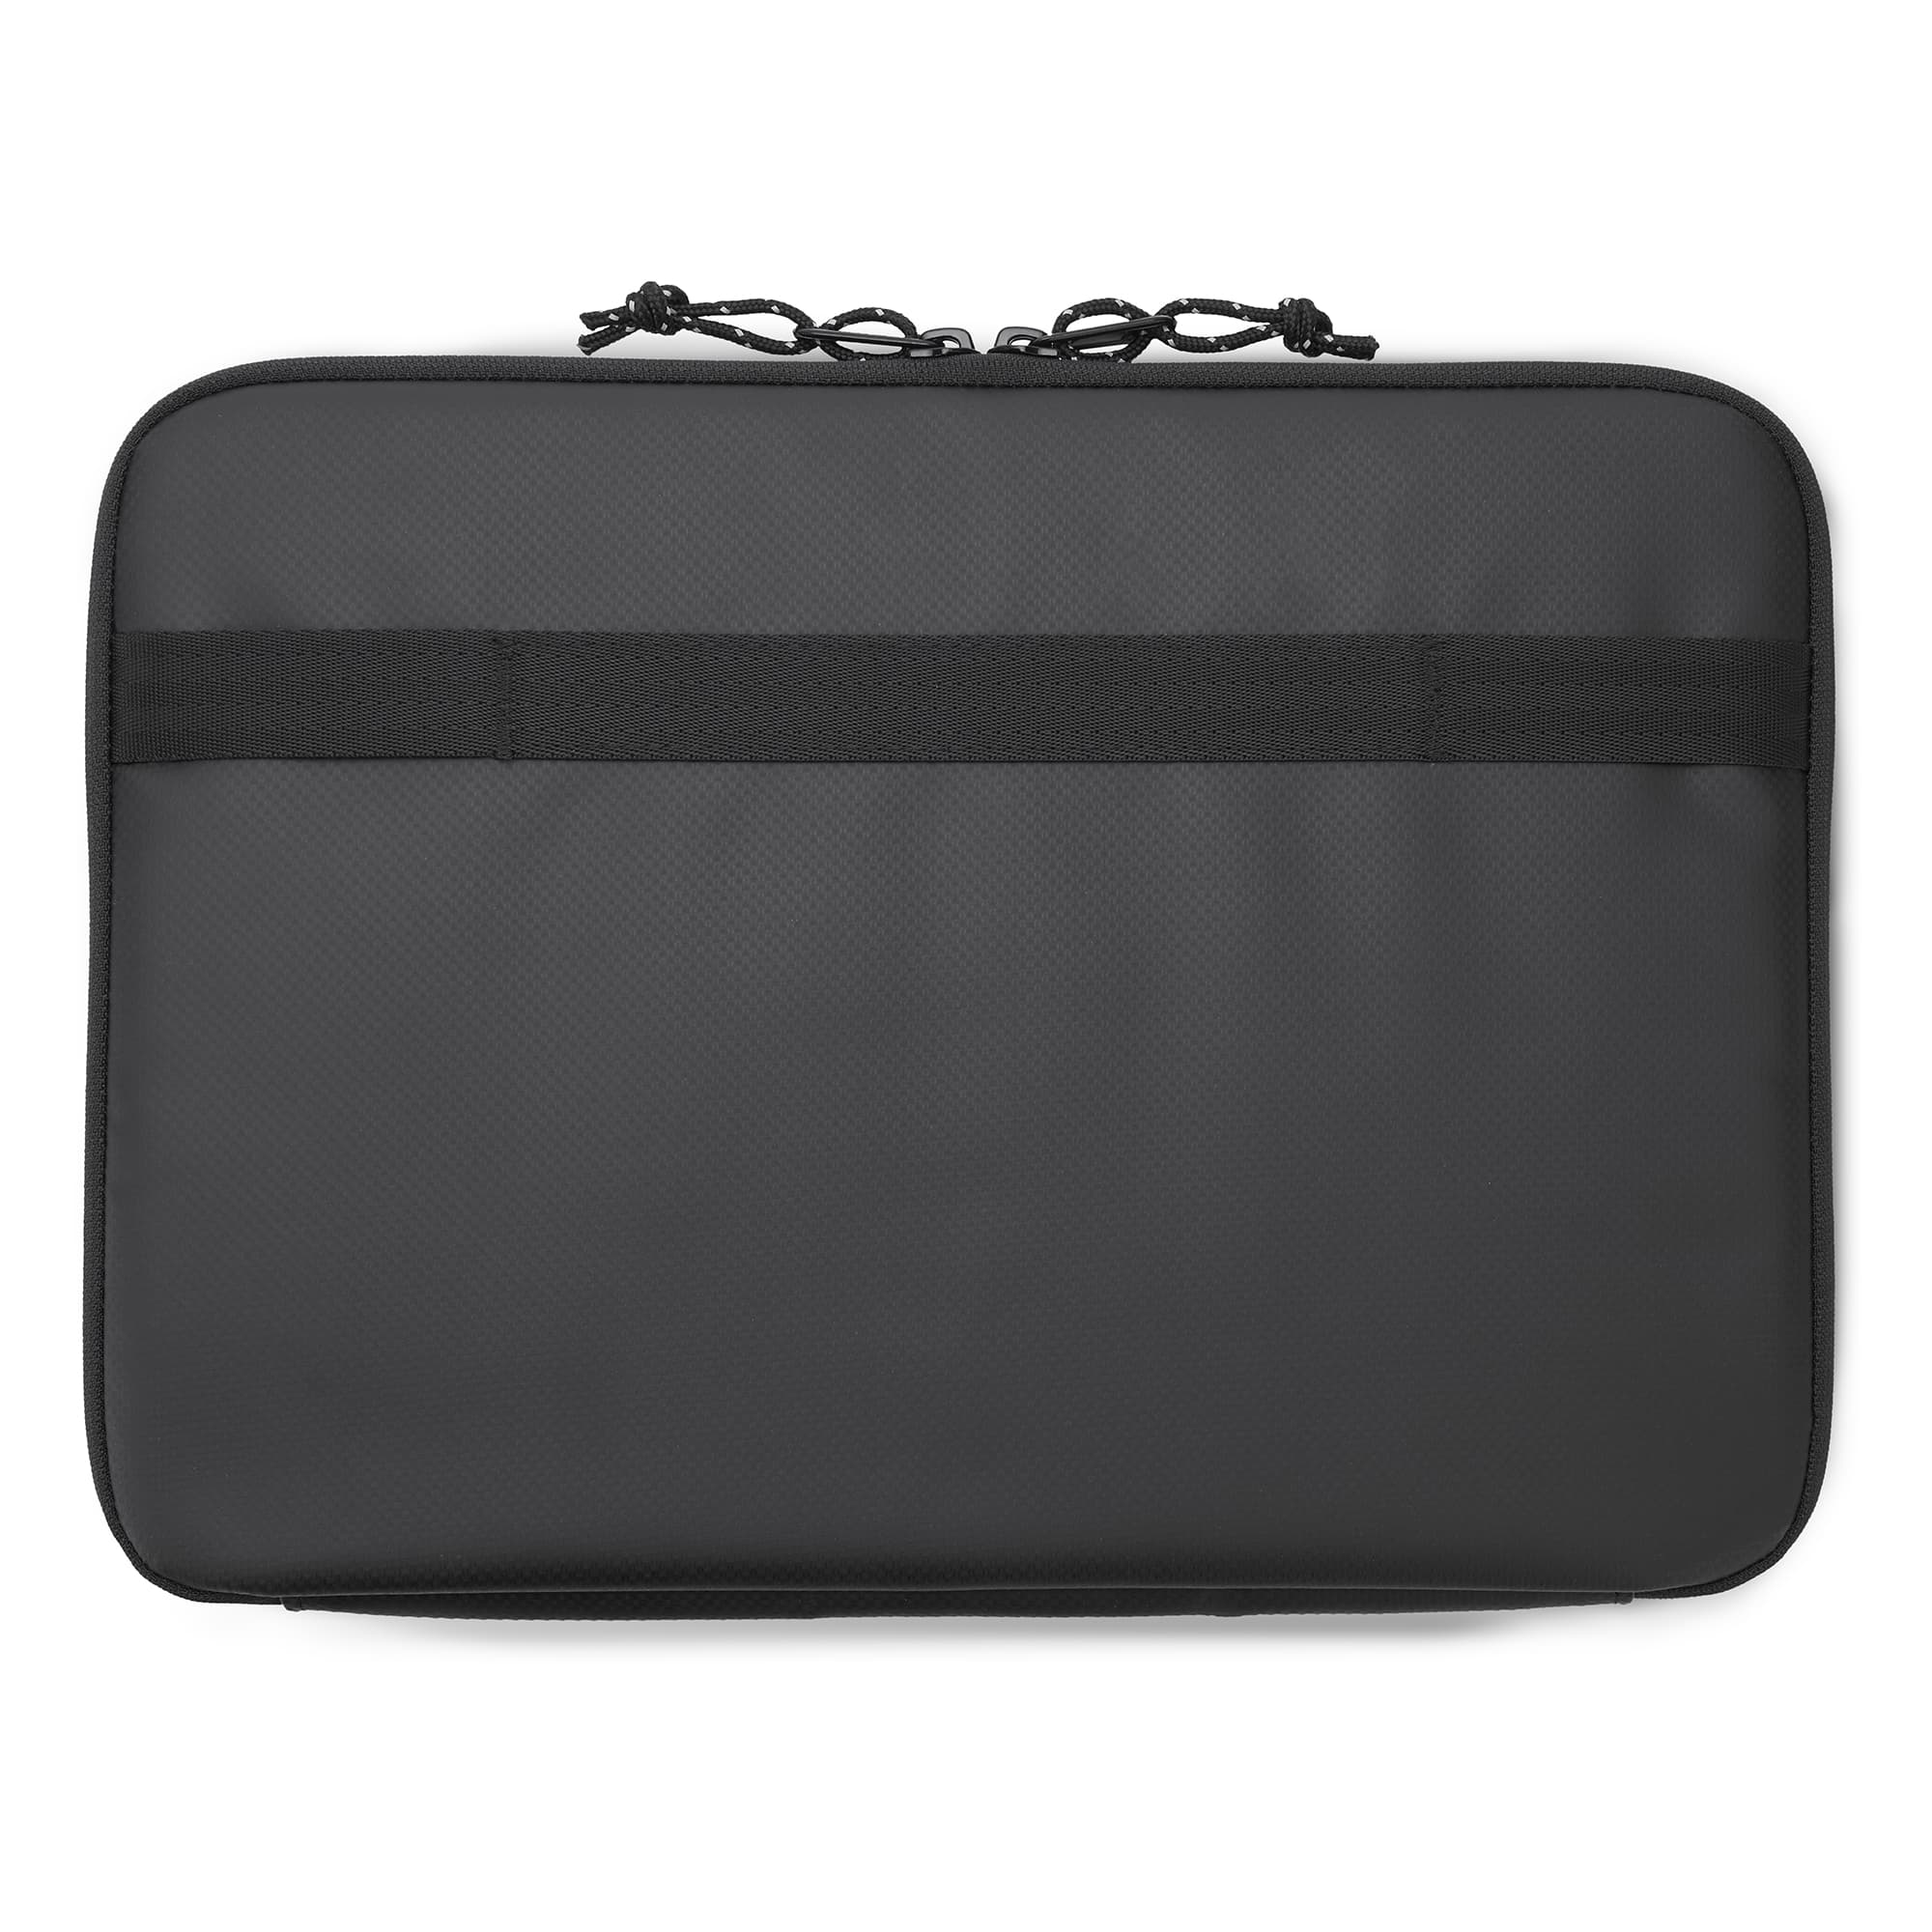 Padded laptop sleeve fits laptops 13 to 14 inches back view